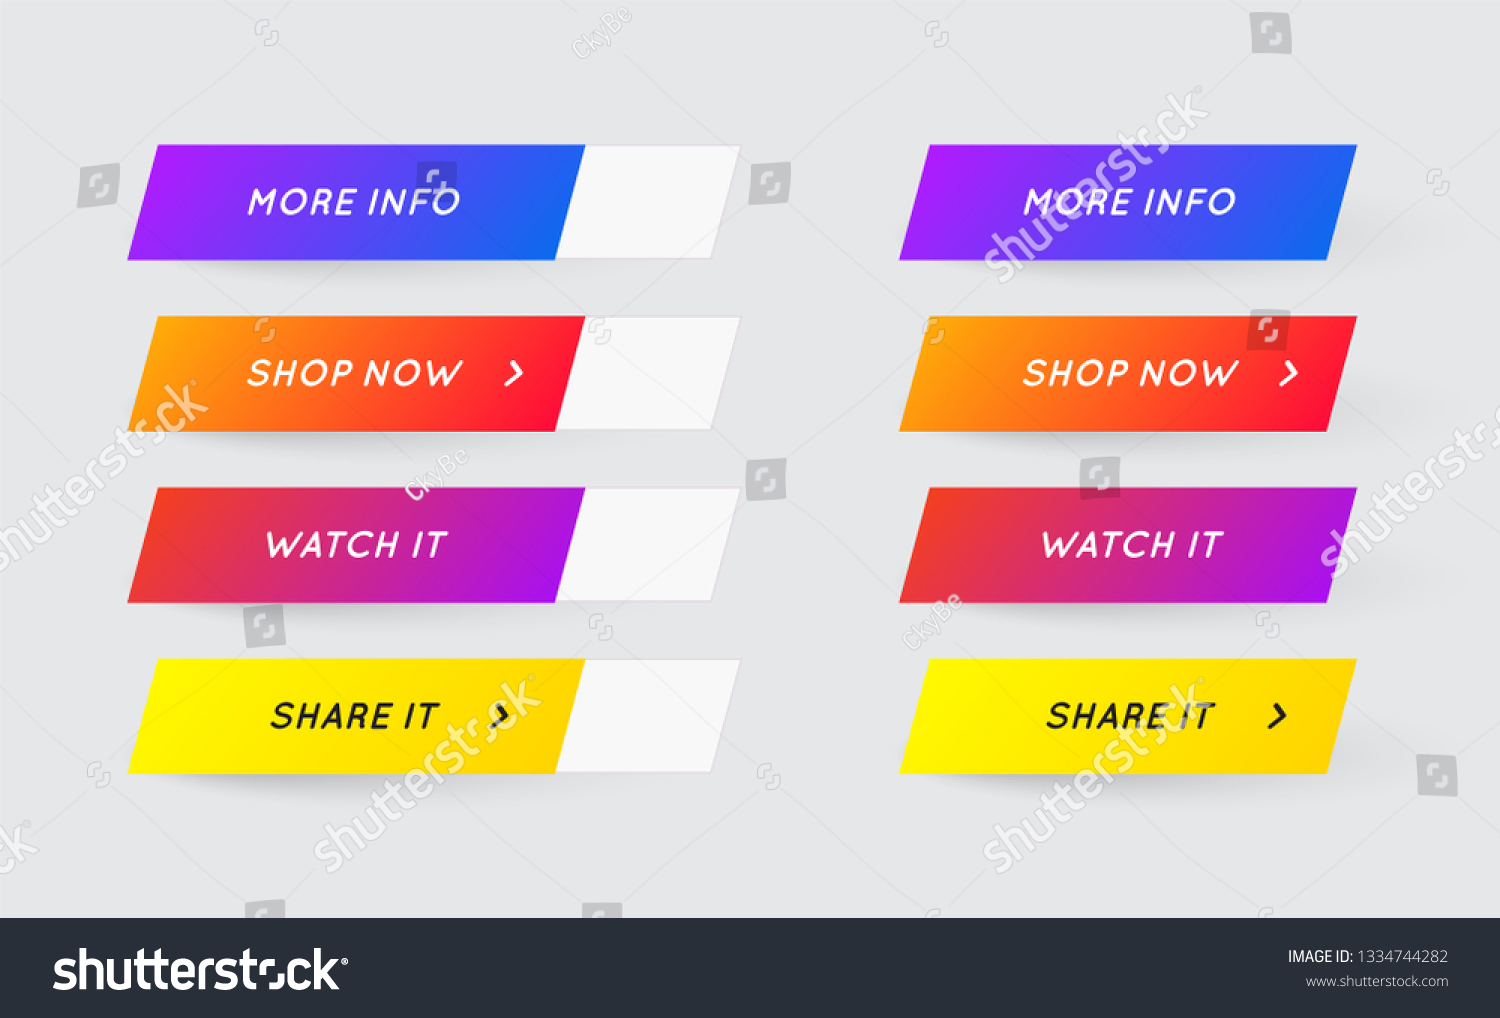 Set of Vector Modern Gradient App or Game Buttons. Trendy gradient colors with shadows.  #1334744282